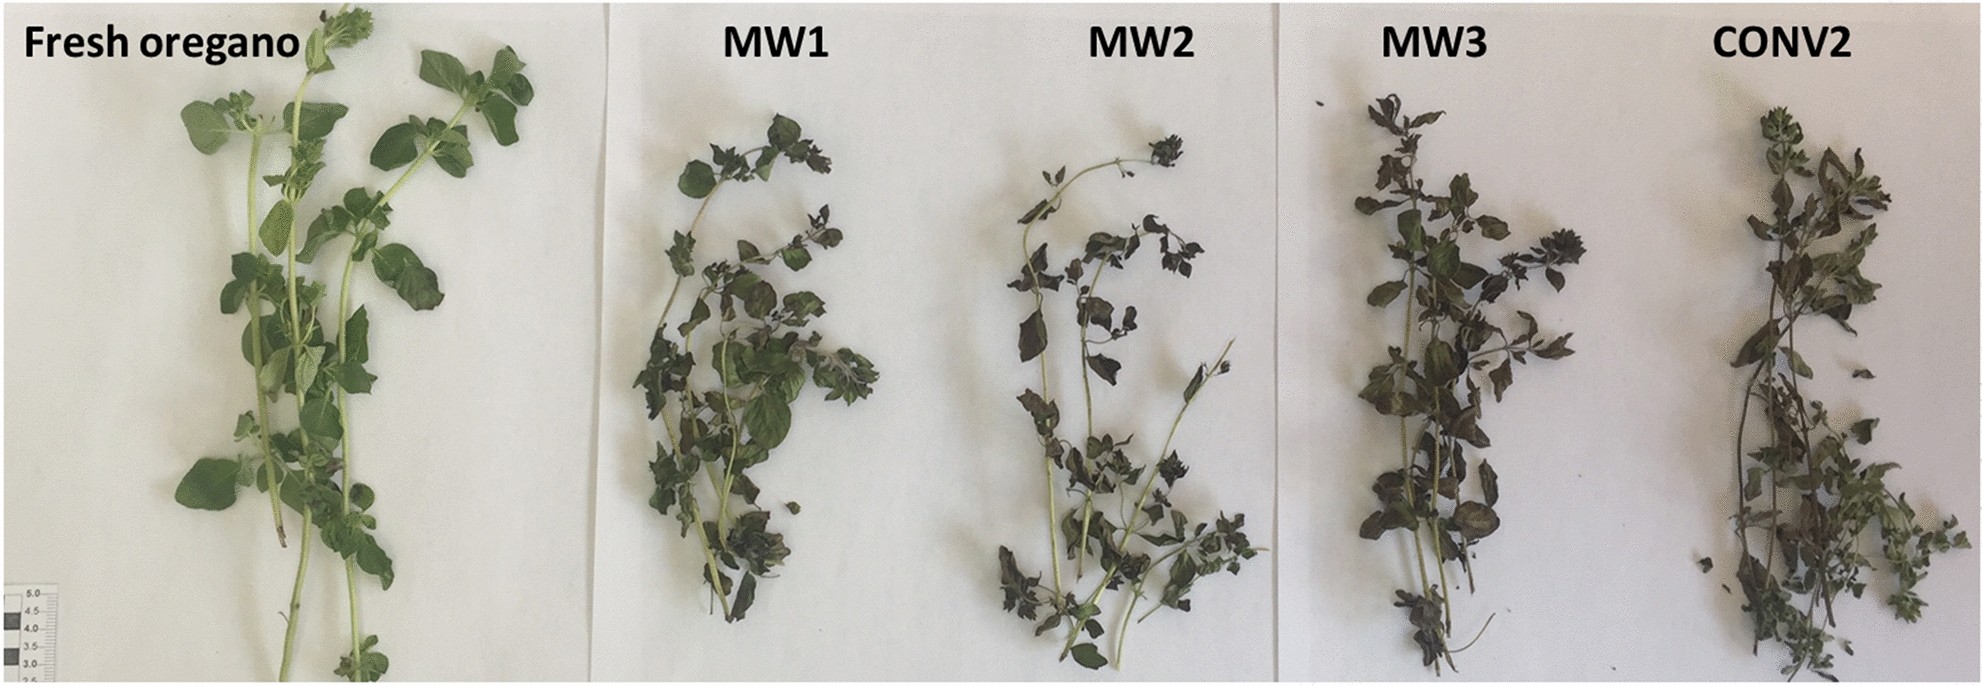 Impact of drying methods on the yield and chemistry of Origanum vulgare L.  essential oil | Scientific Reports